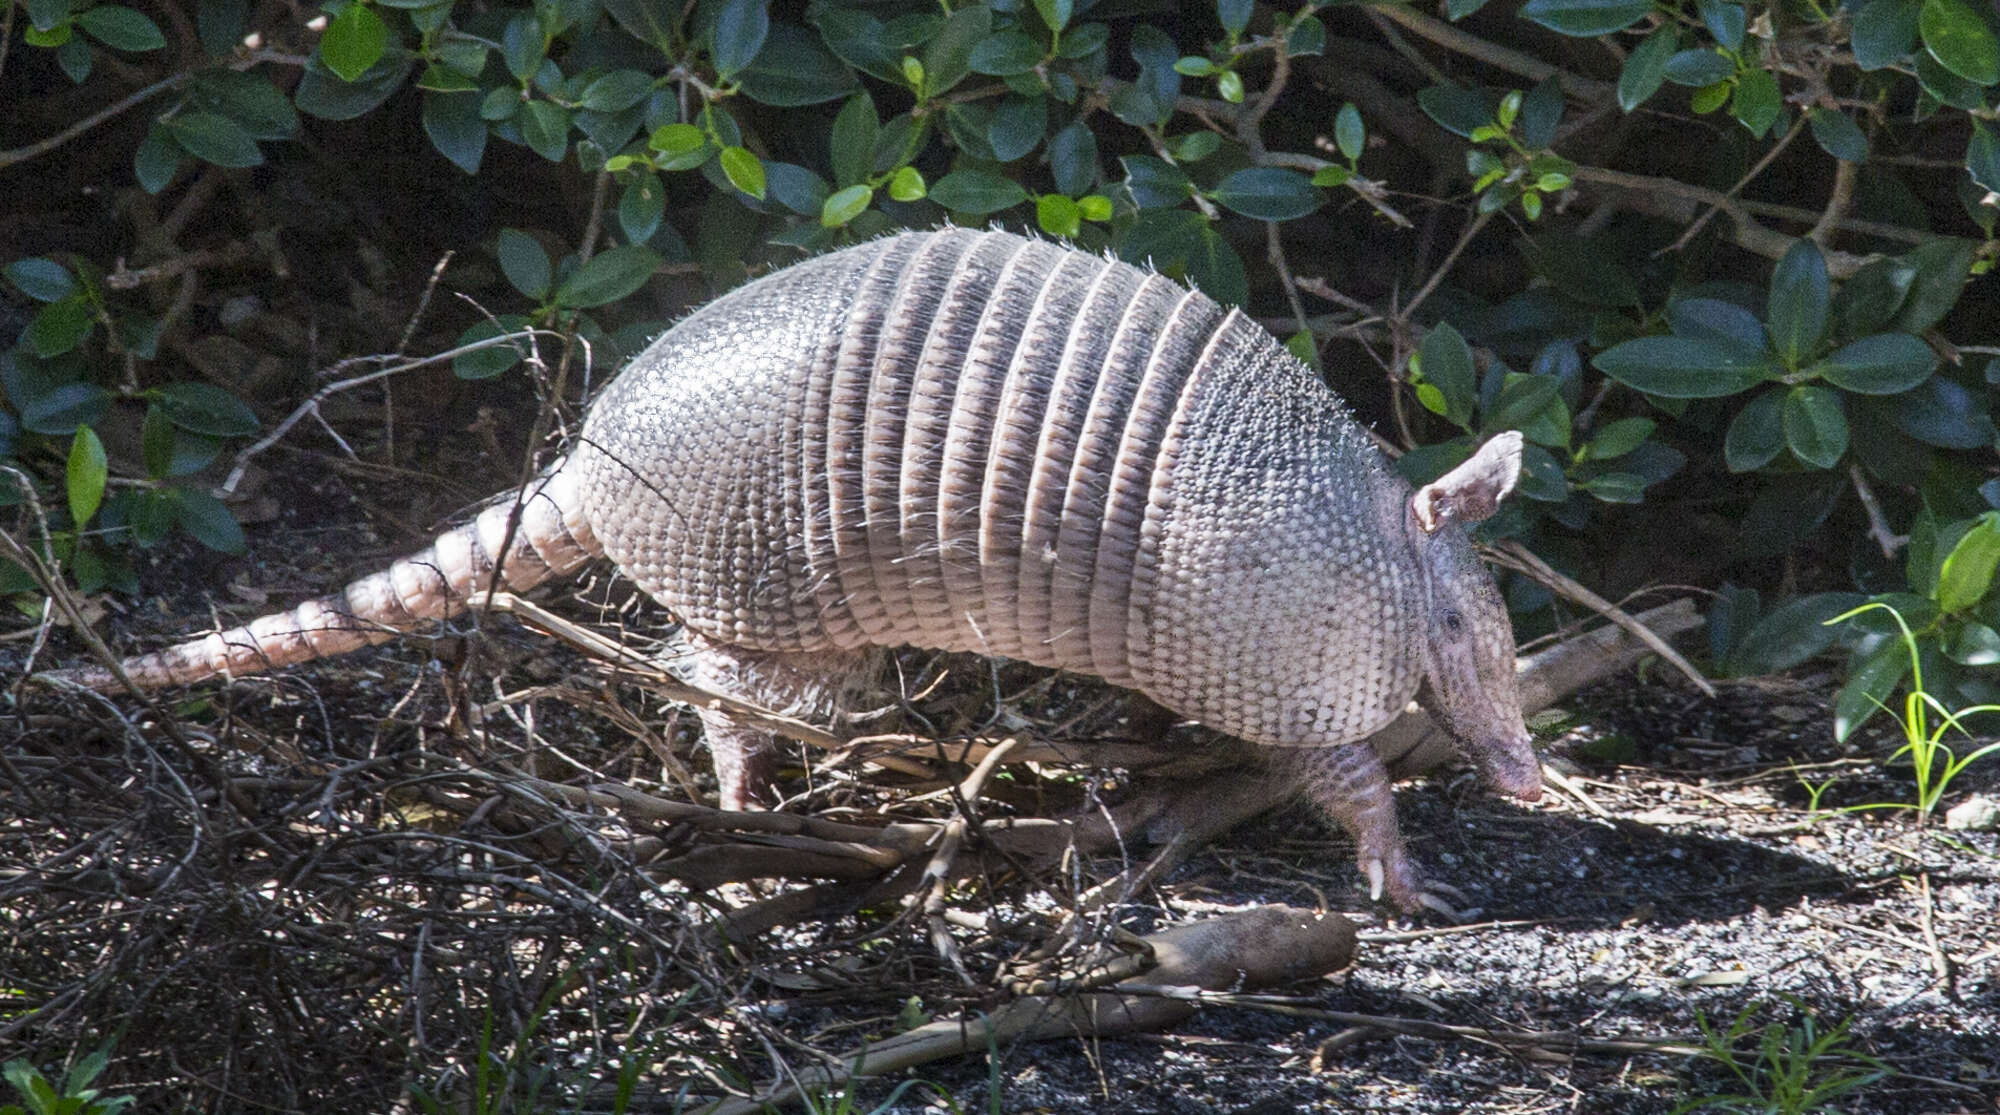 Image of long-nosed armadillos